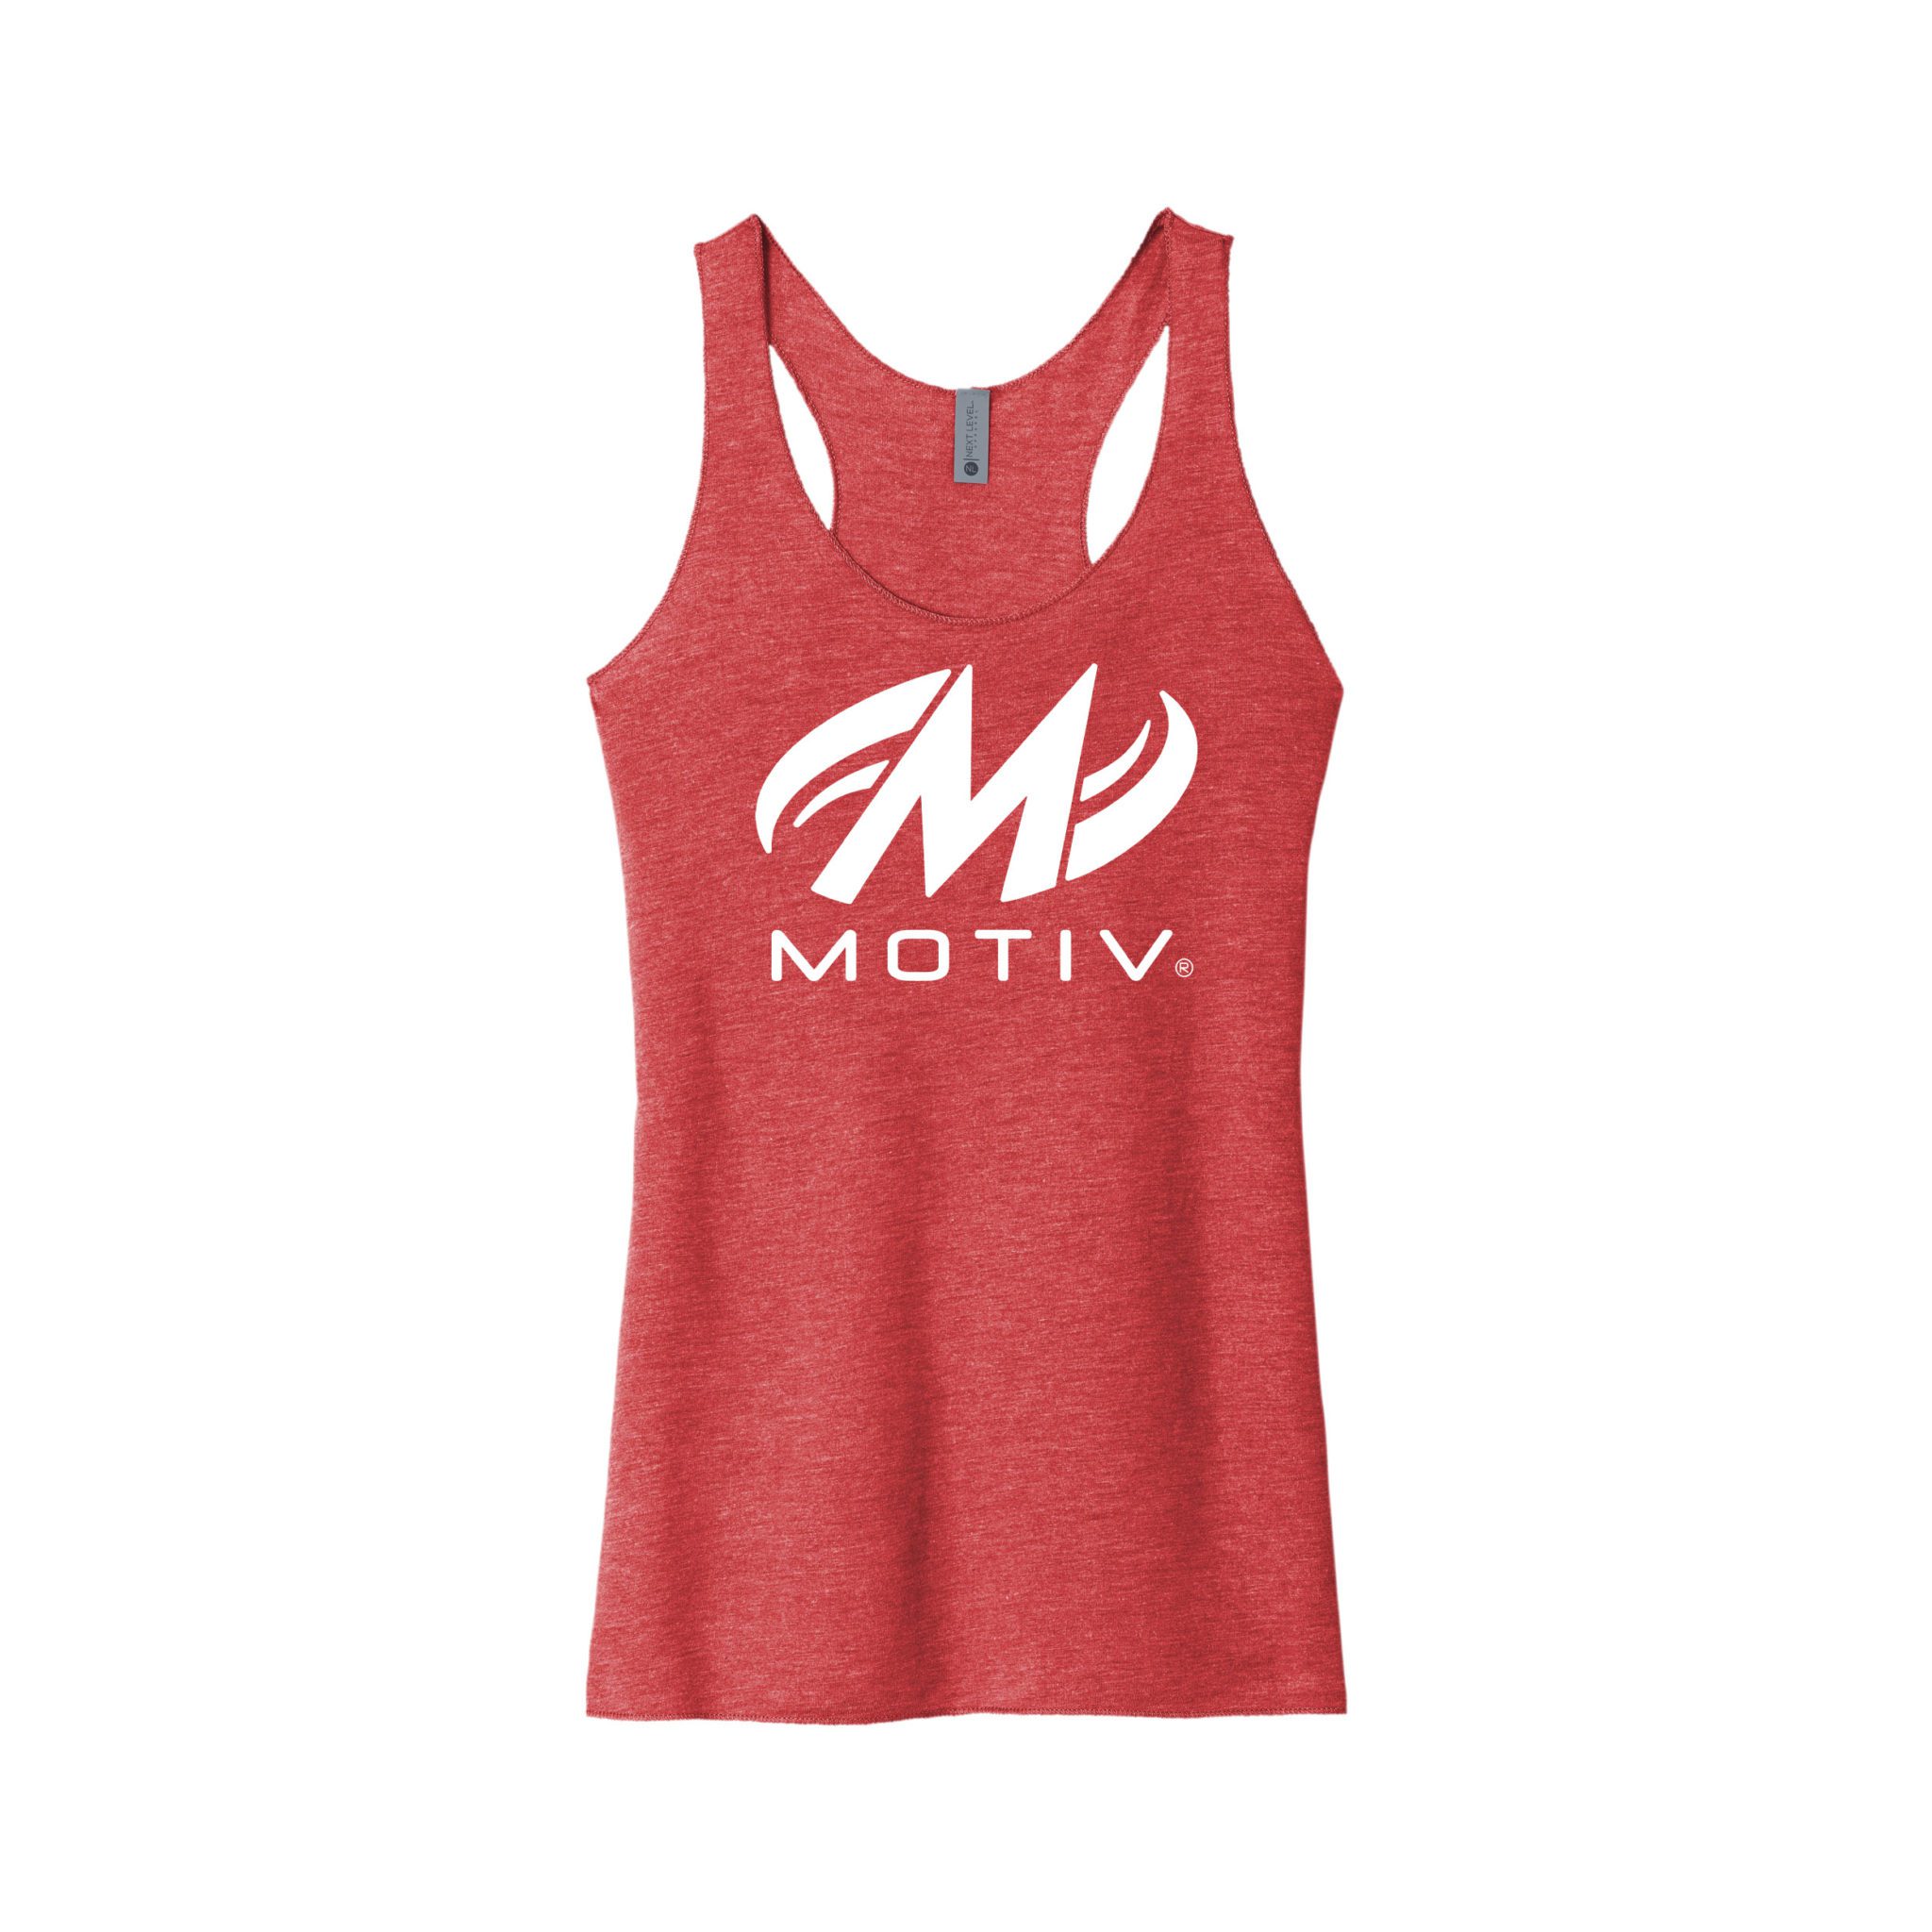 Image of Shop All Tank Tops!